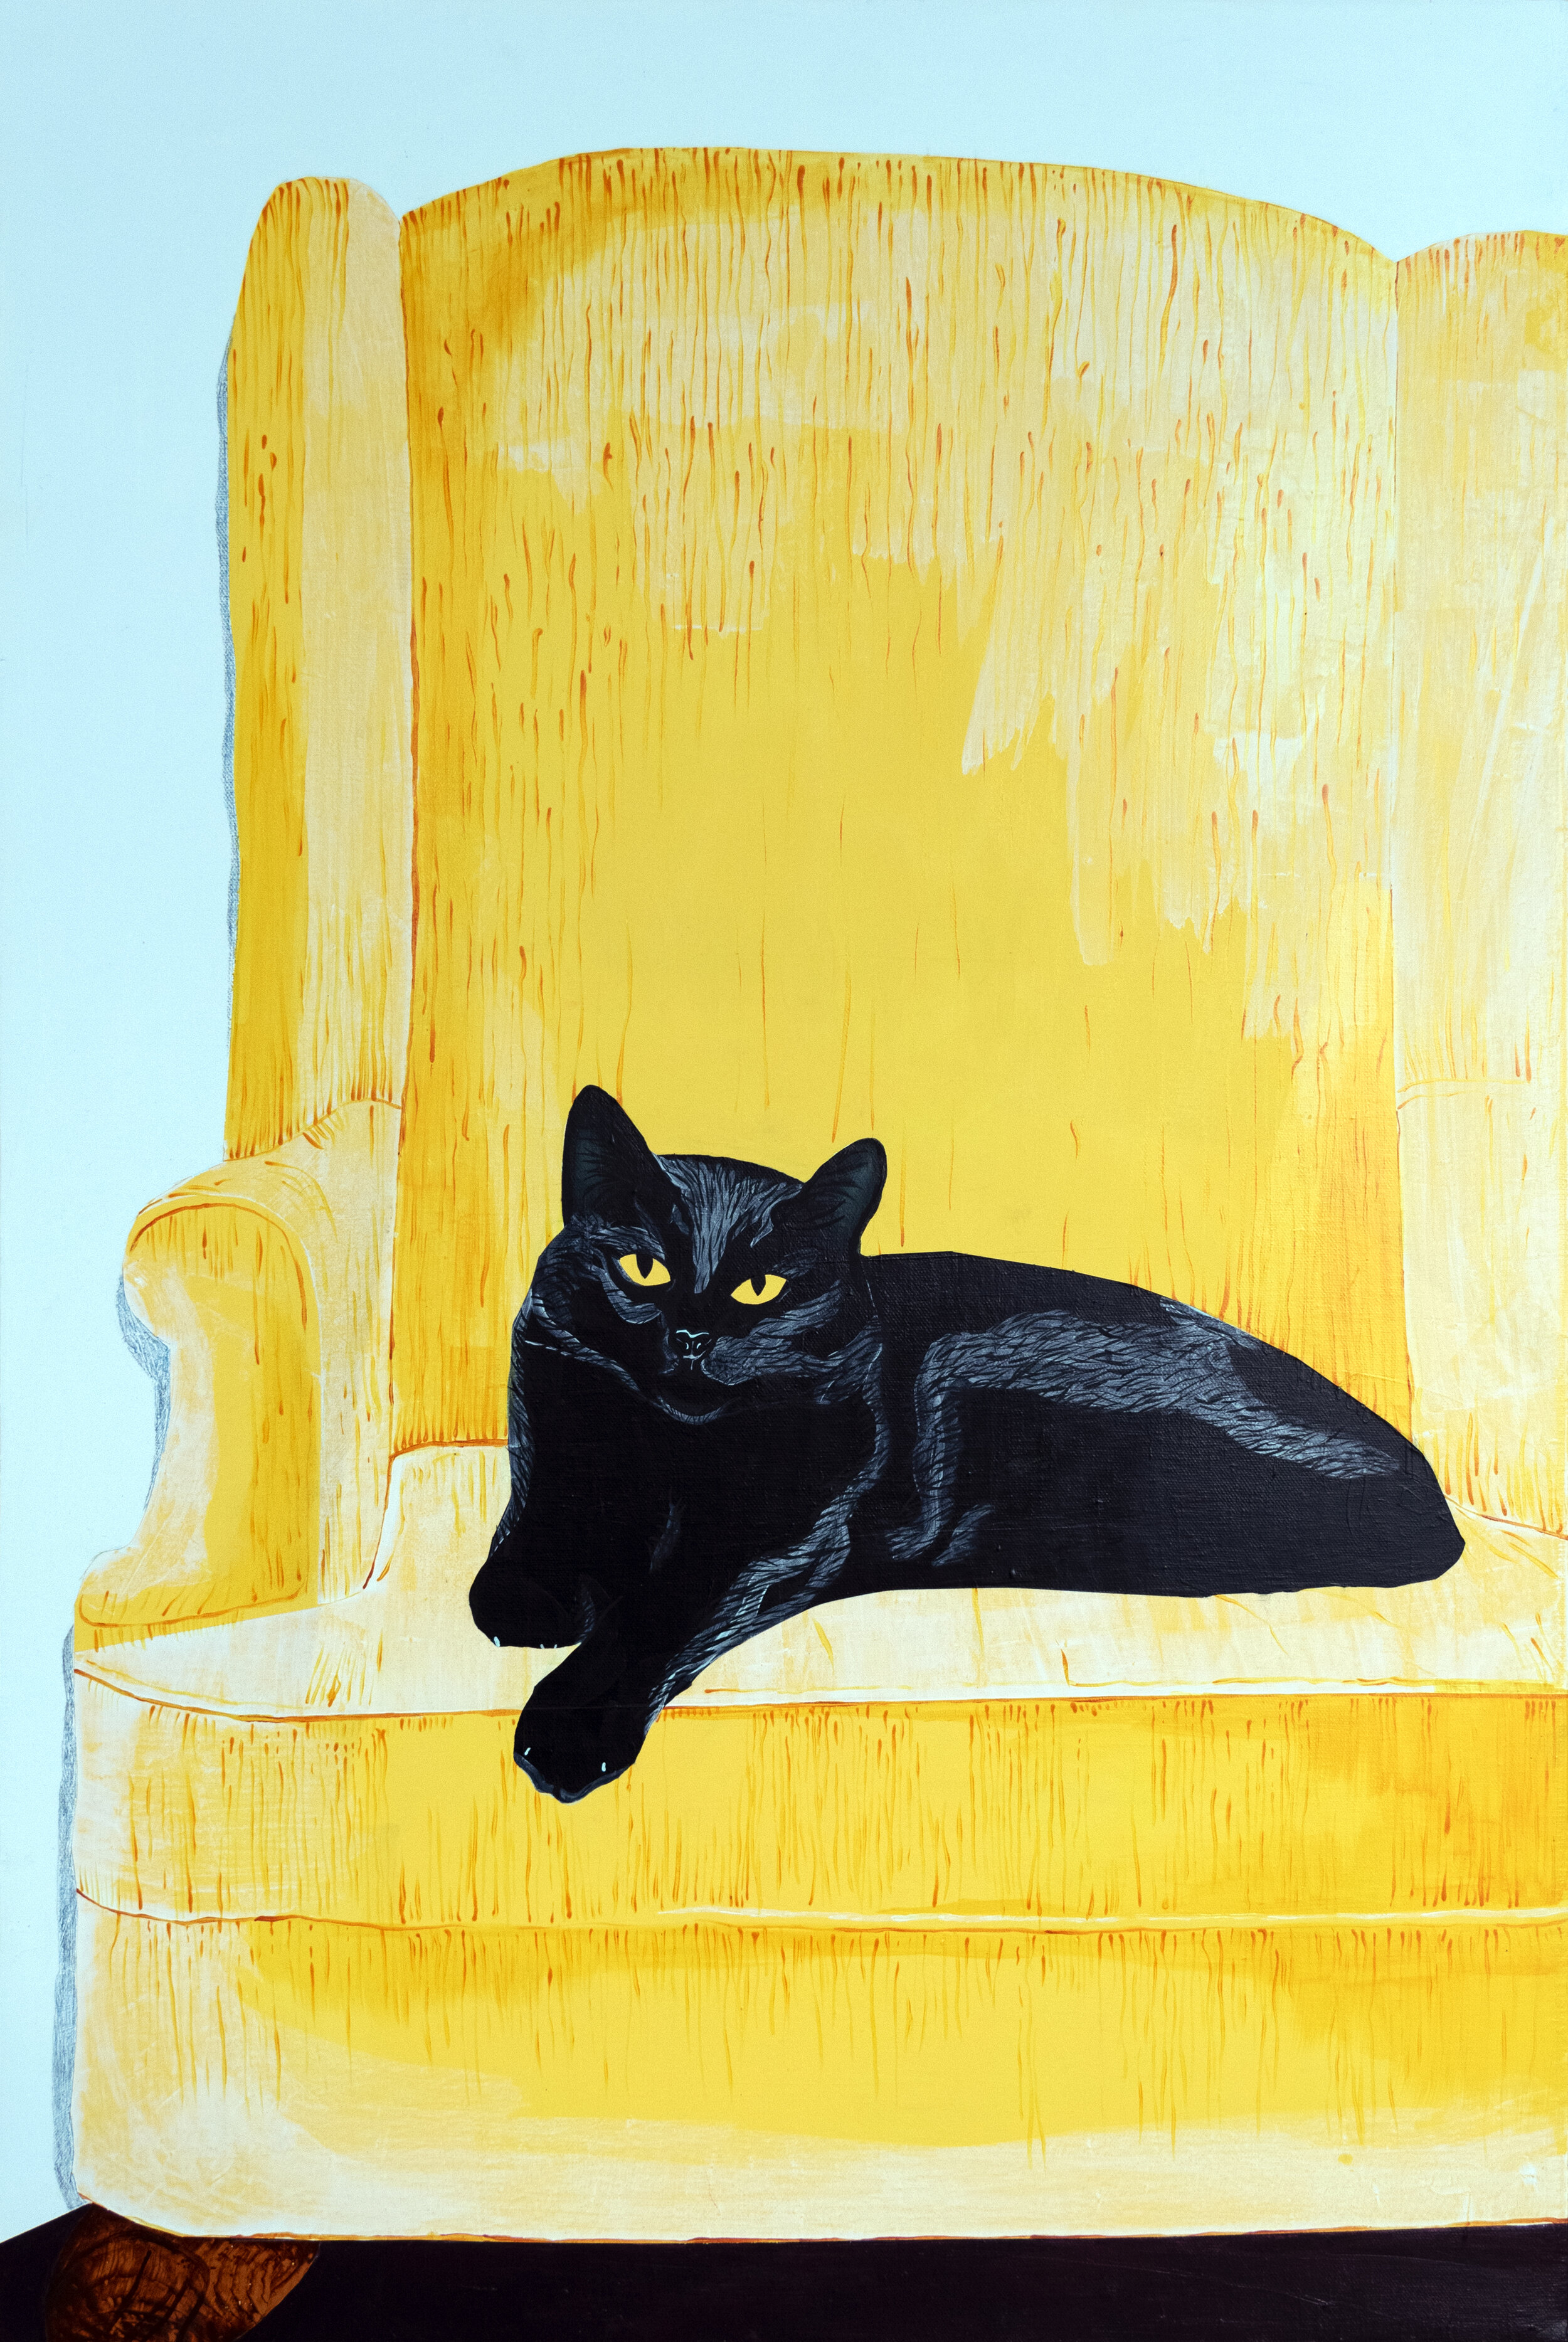 Nelson and the Yellow Chair